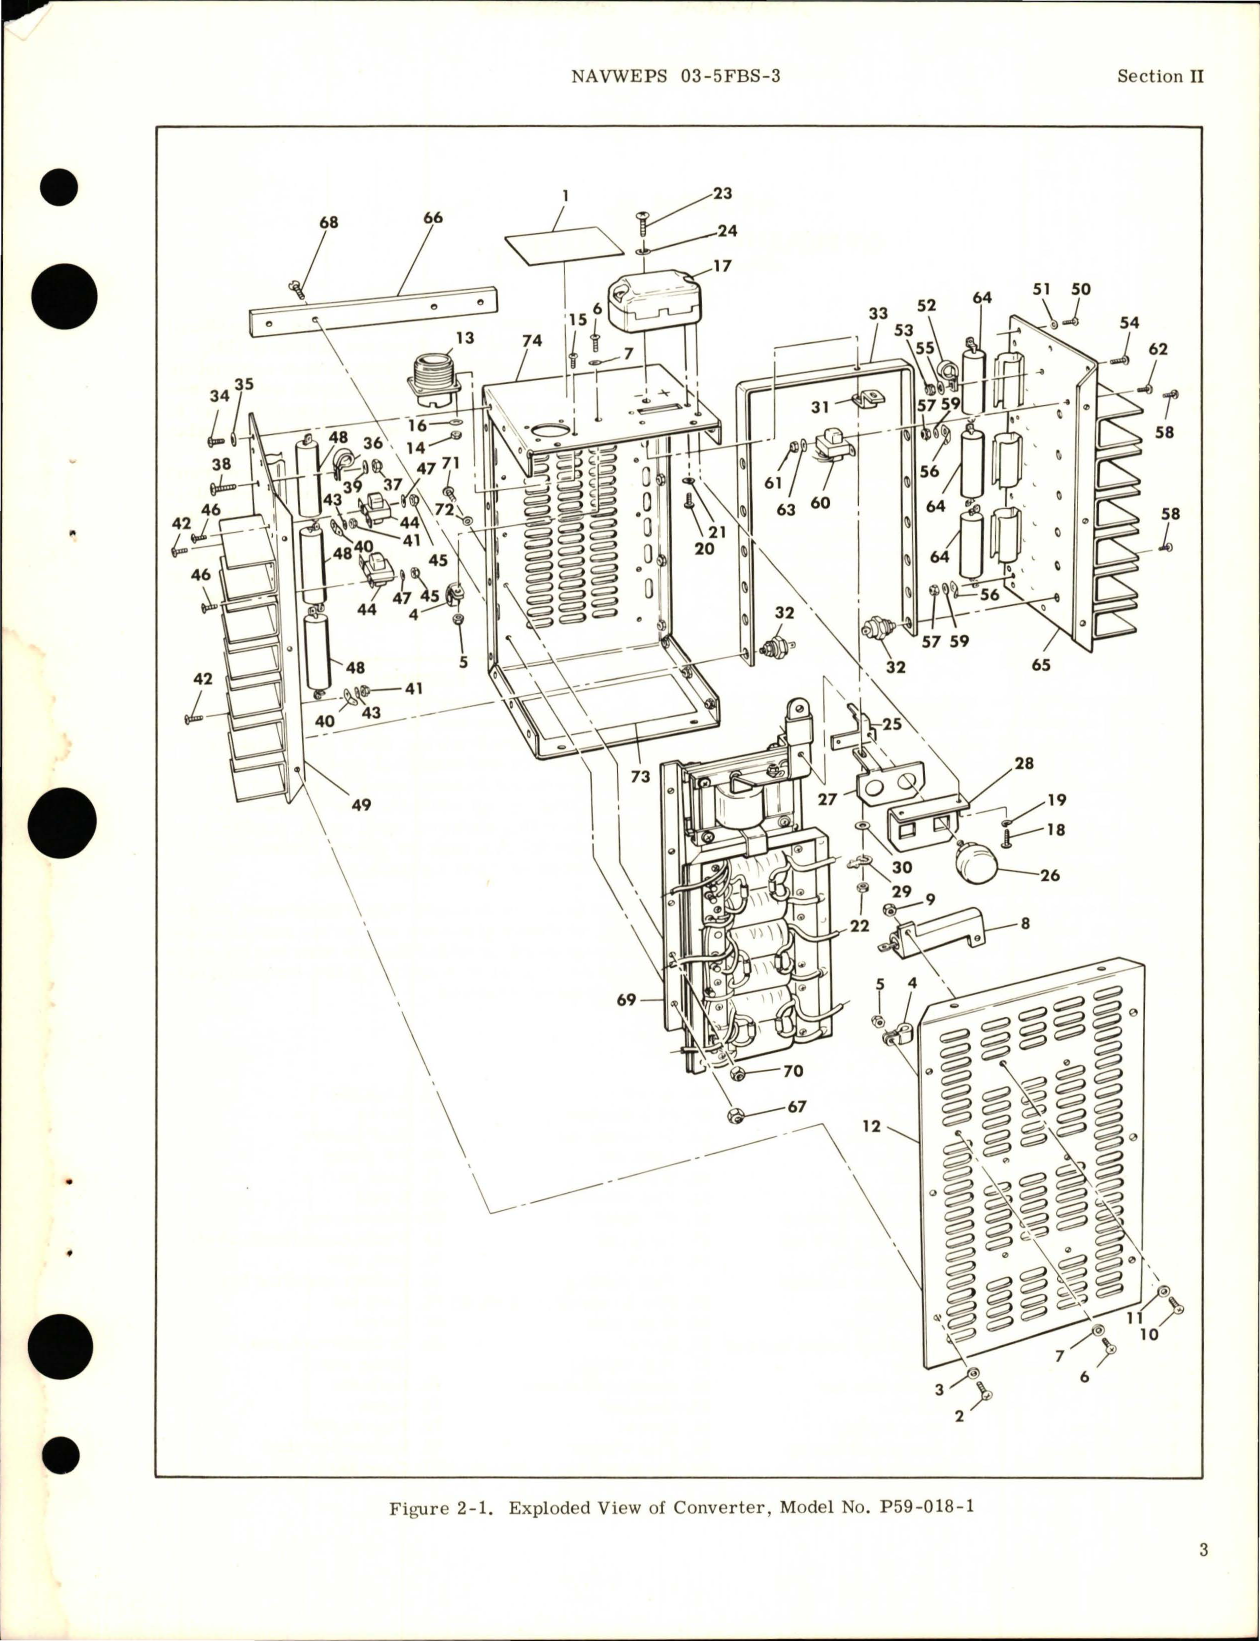 Sample page 7 from AirCorps Library document: Overhaul Instructions for Transformer Rectifier Converter - Model P59-018-1